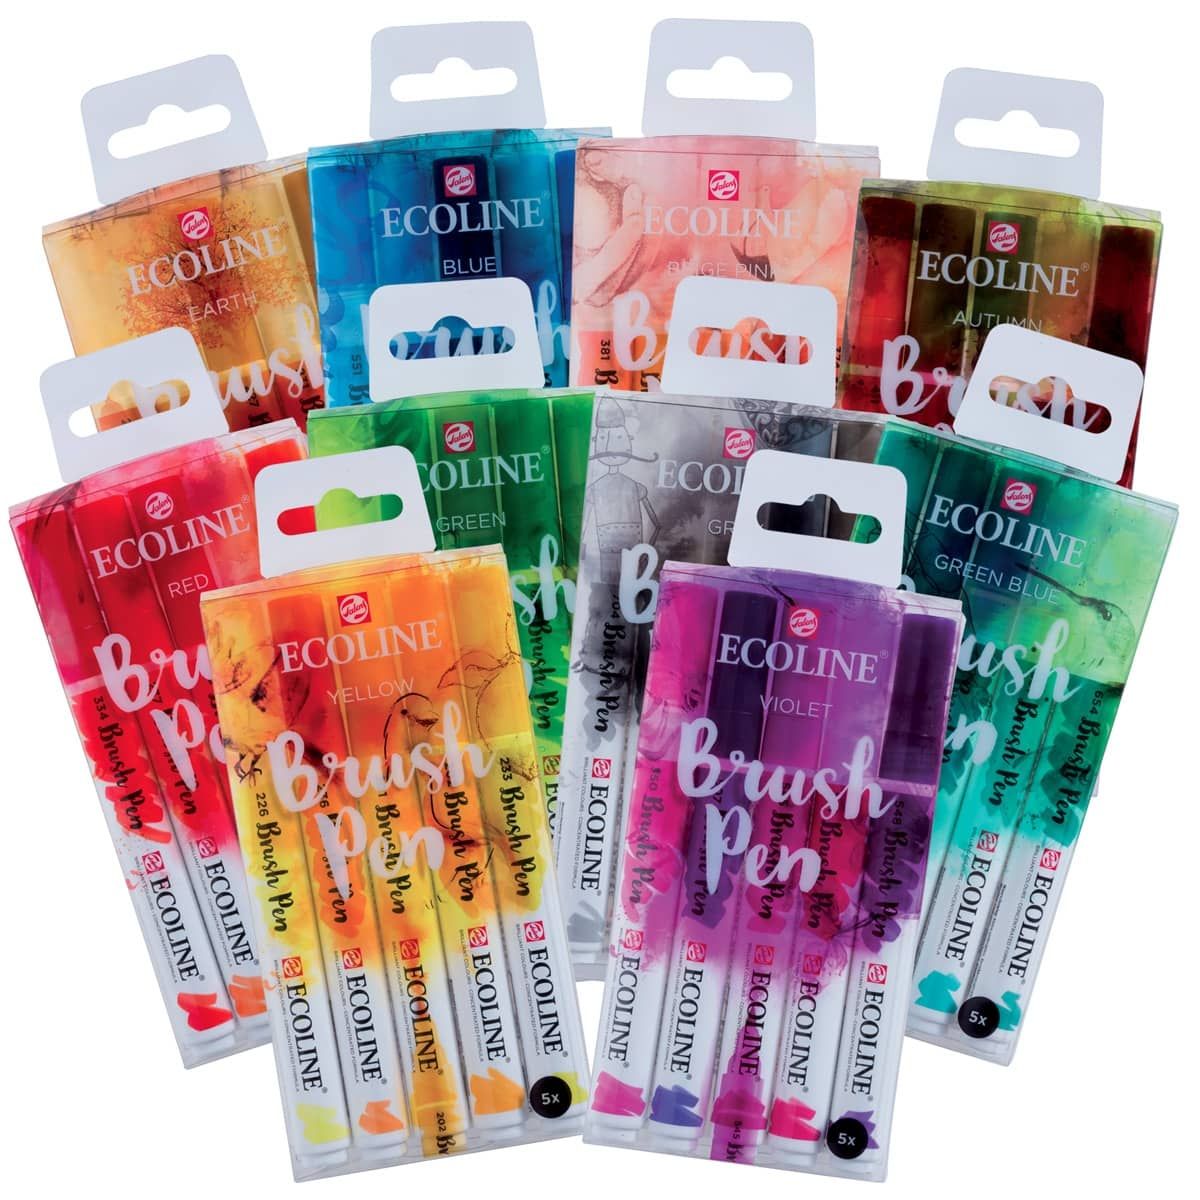 Royal Talens Ecoline Liquid Watercolour Drawing Painting Brush Pens Set of  15 Assorted Colours in Wallet Blender Pen 